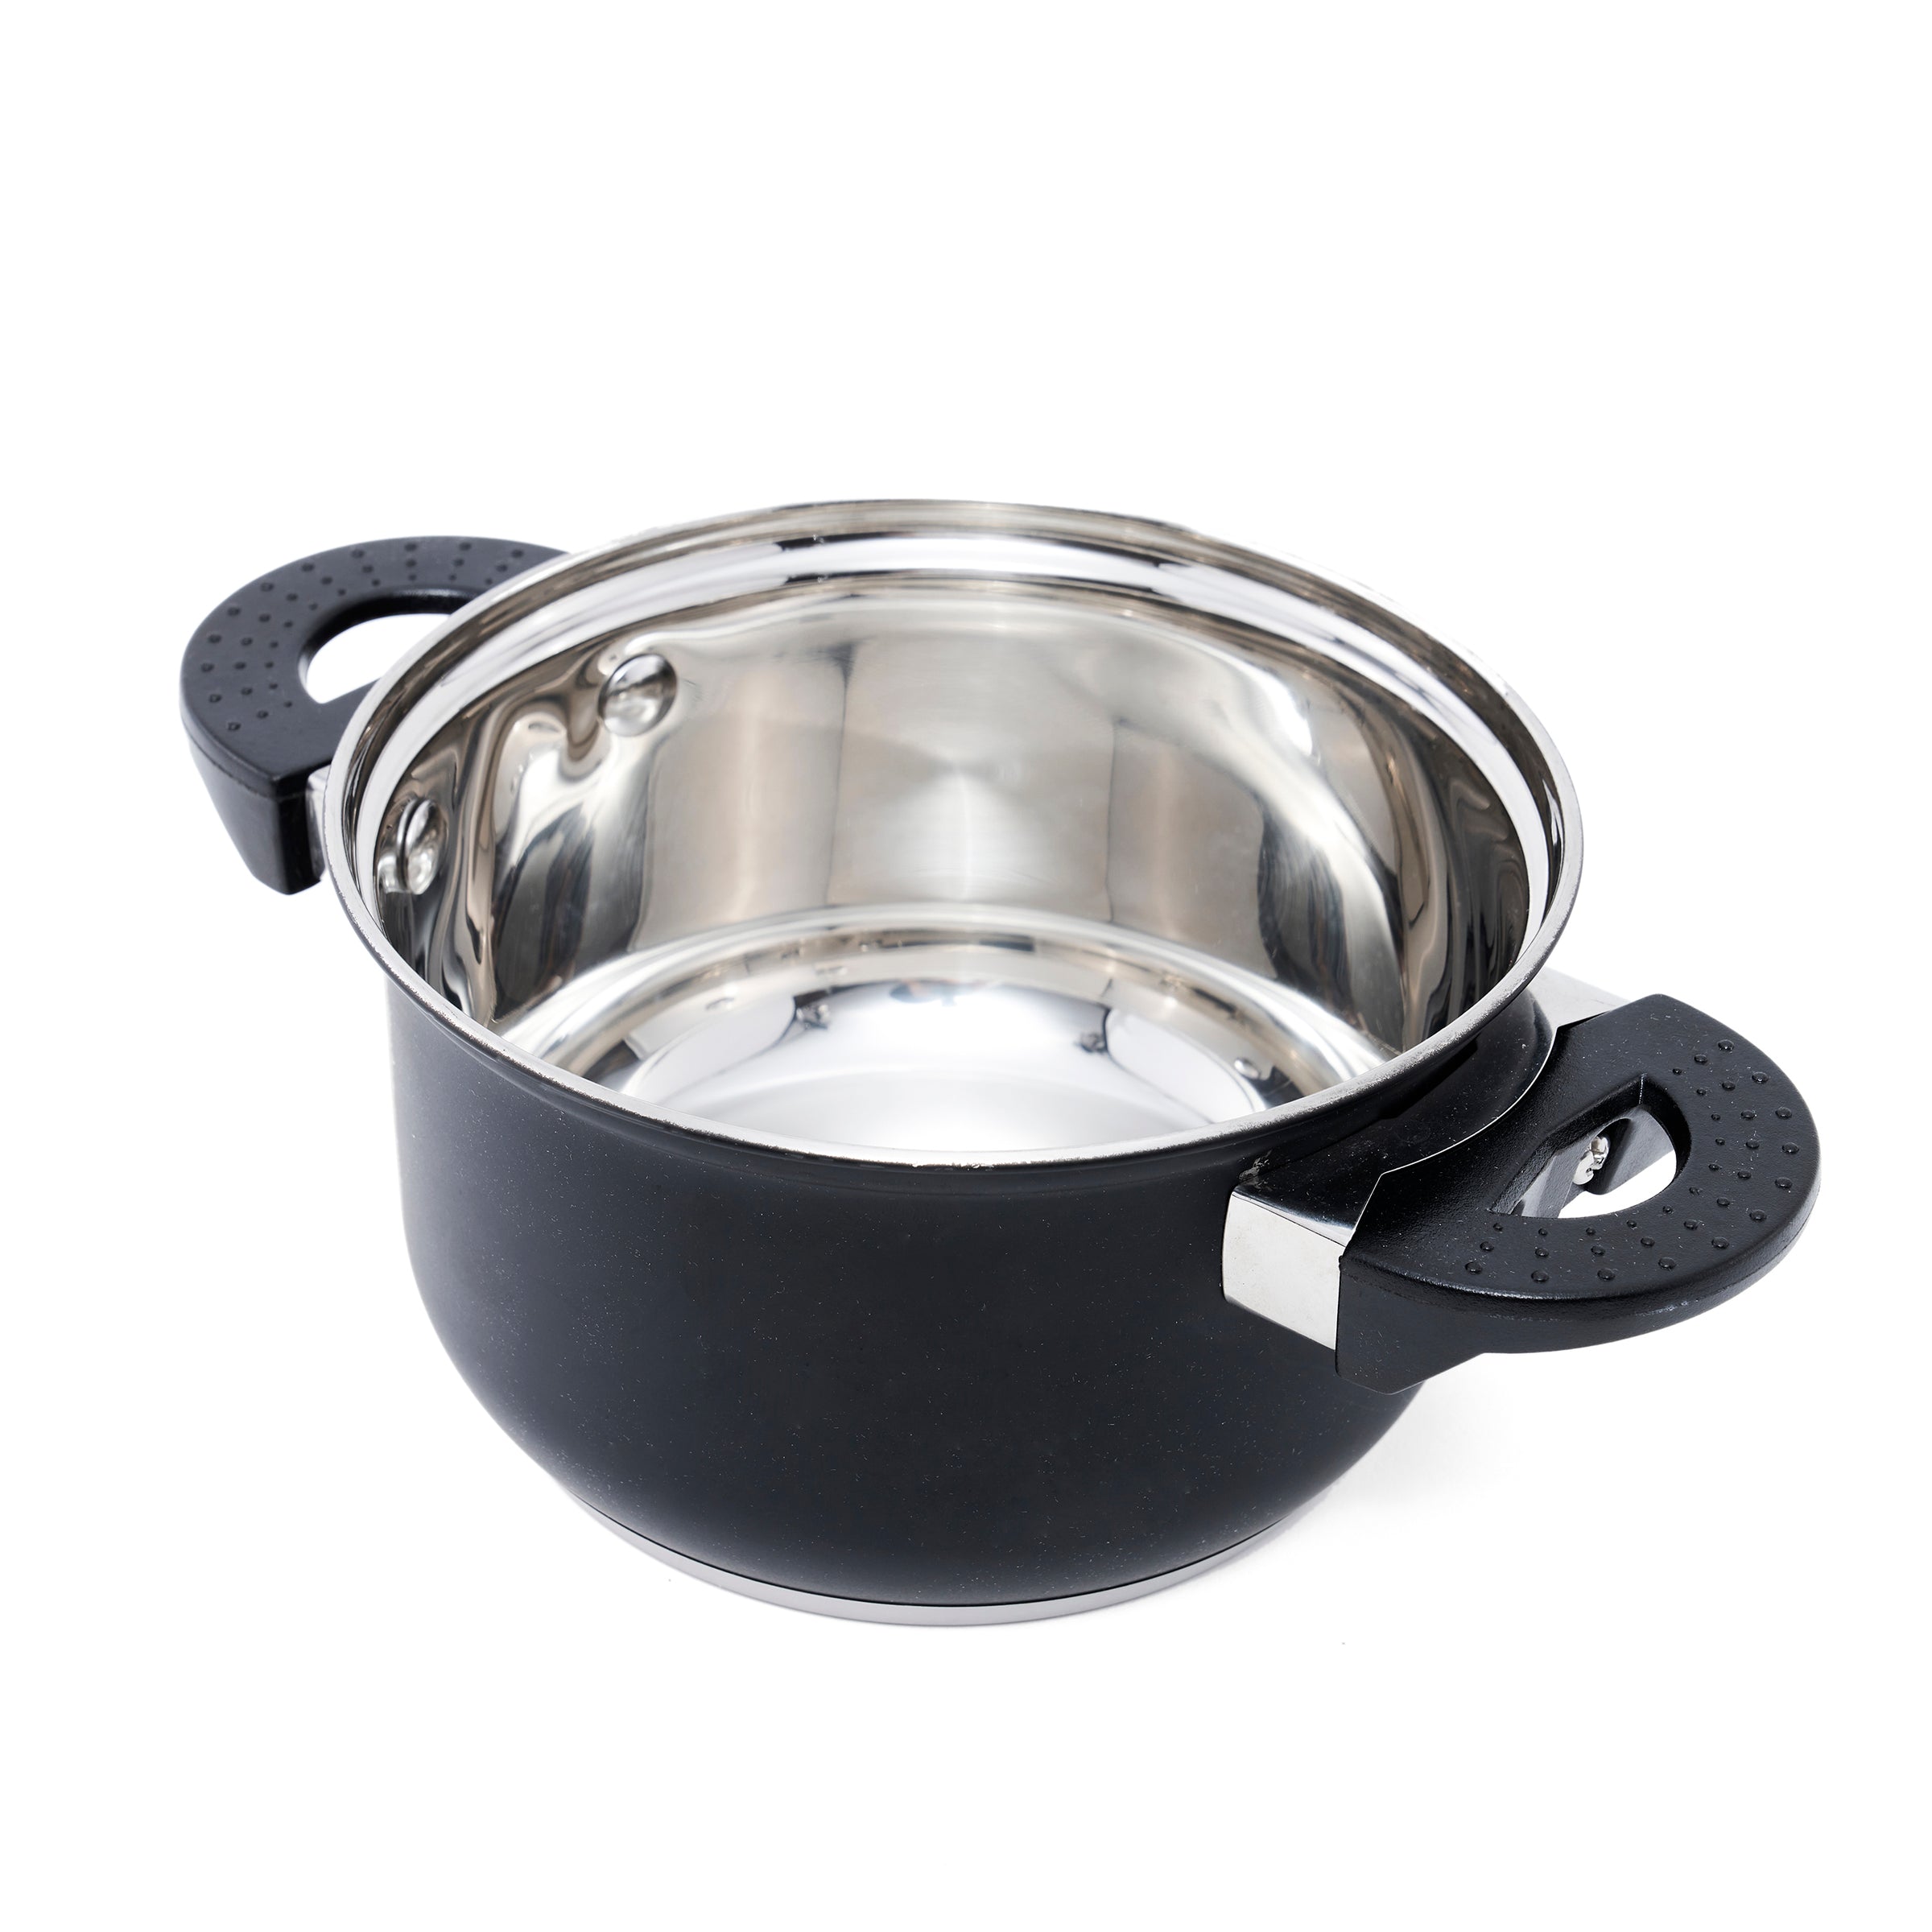 Small Cooking Pot